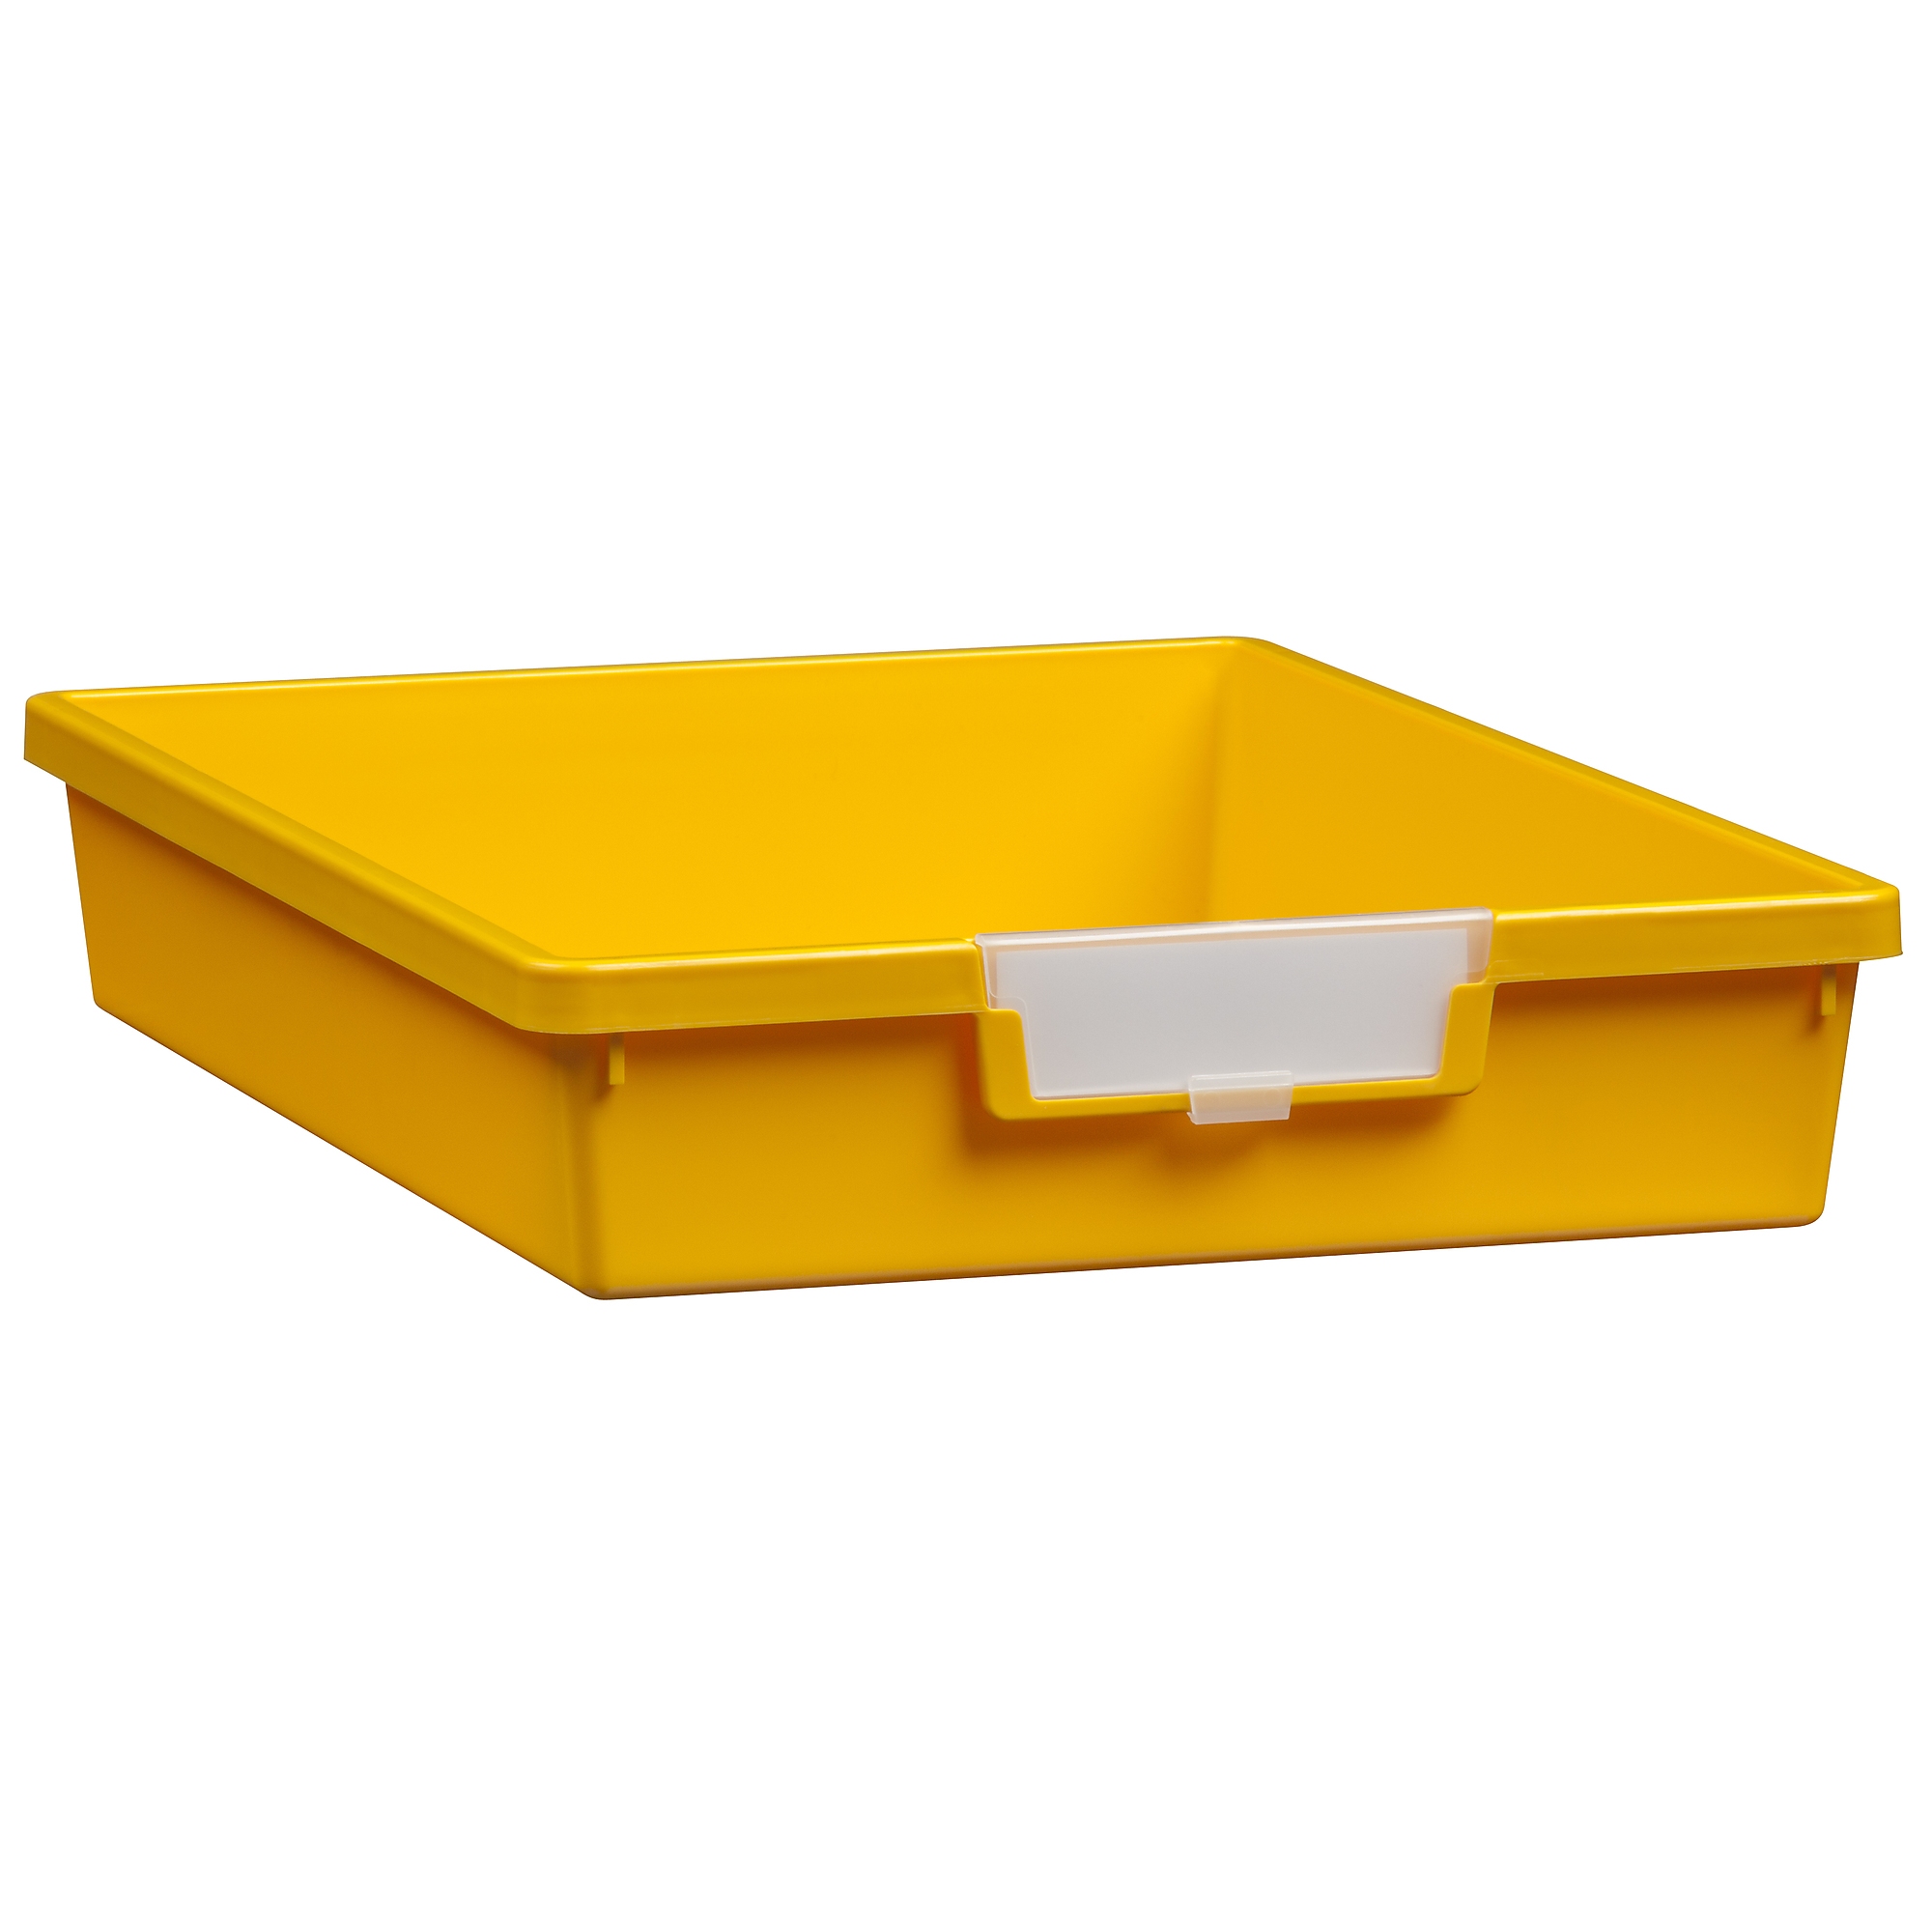 Certwood StorWerks, Slim Line 3Inch Tray in Primary Yellow-1PK, Included (qty.) 1 Height 3 in, Model CE1950PY1